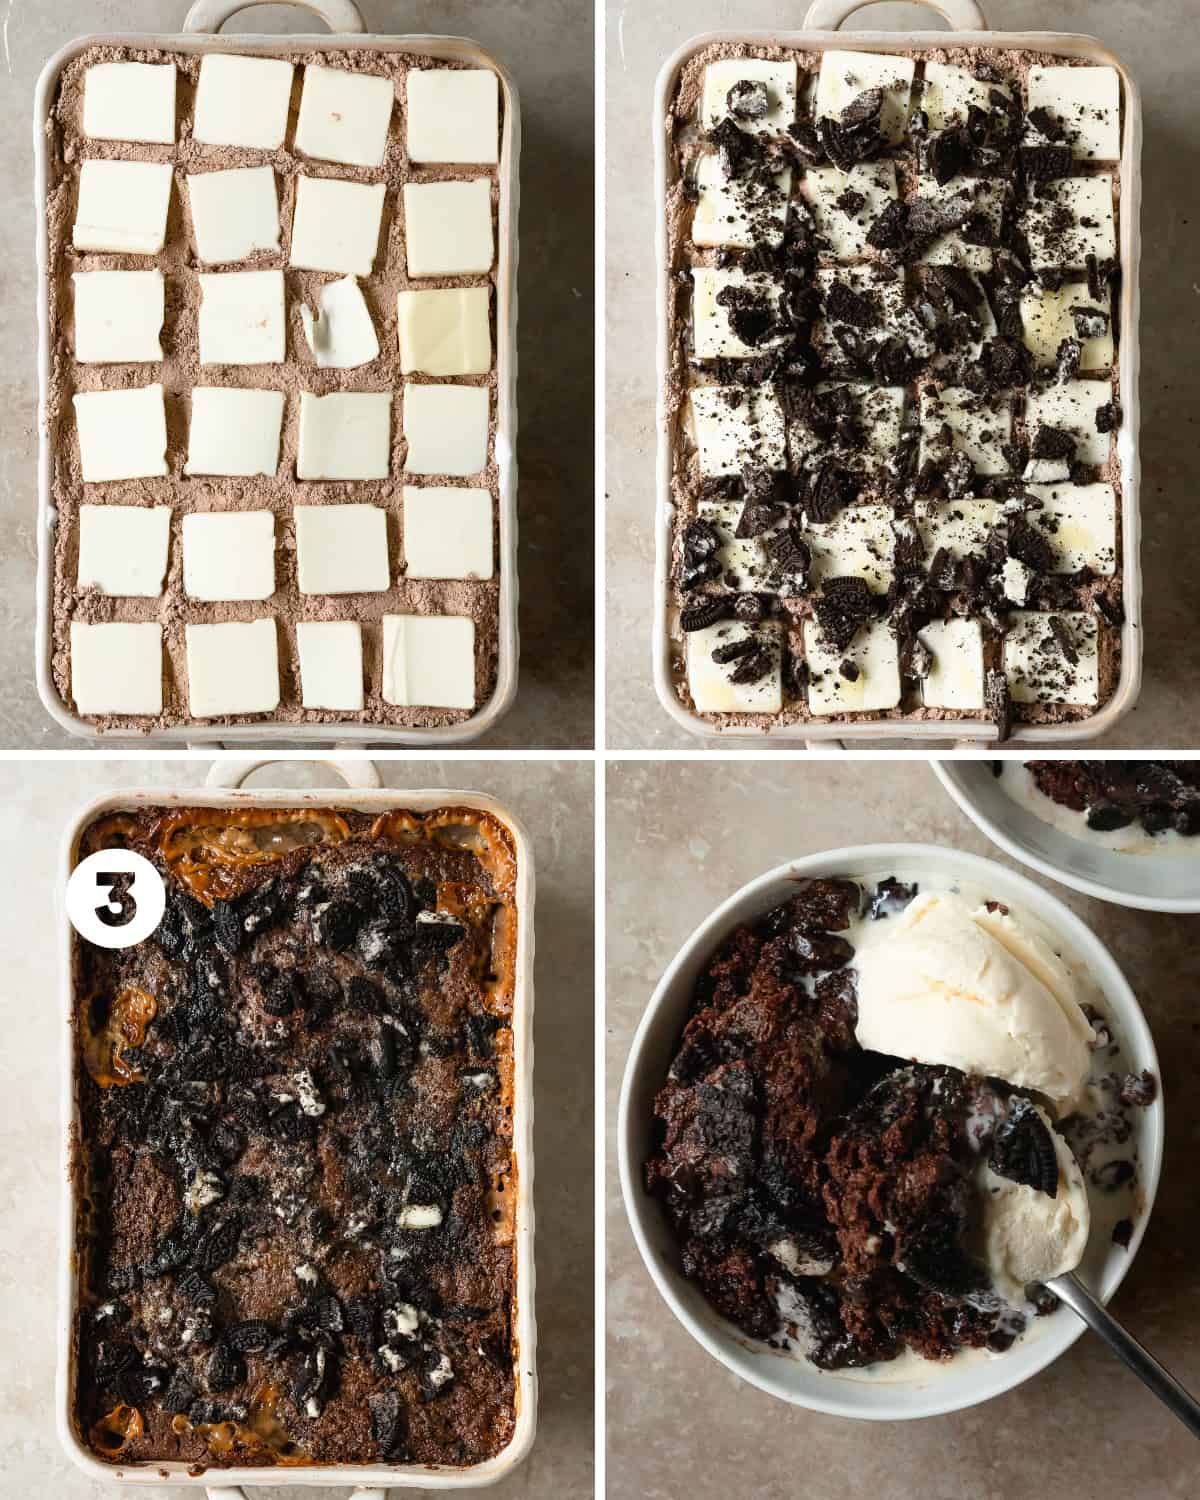 Bake the Oreo fudge dump cake for 35 - 40  minutes. The sweetened condensed milk will bubble around the edges and will look lightly caramelized. Cool the easy Oreo cake for 5 minutes, scoop into a bowl, top with ice cream if you like and enjoy!